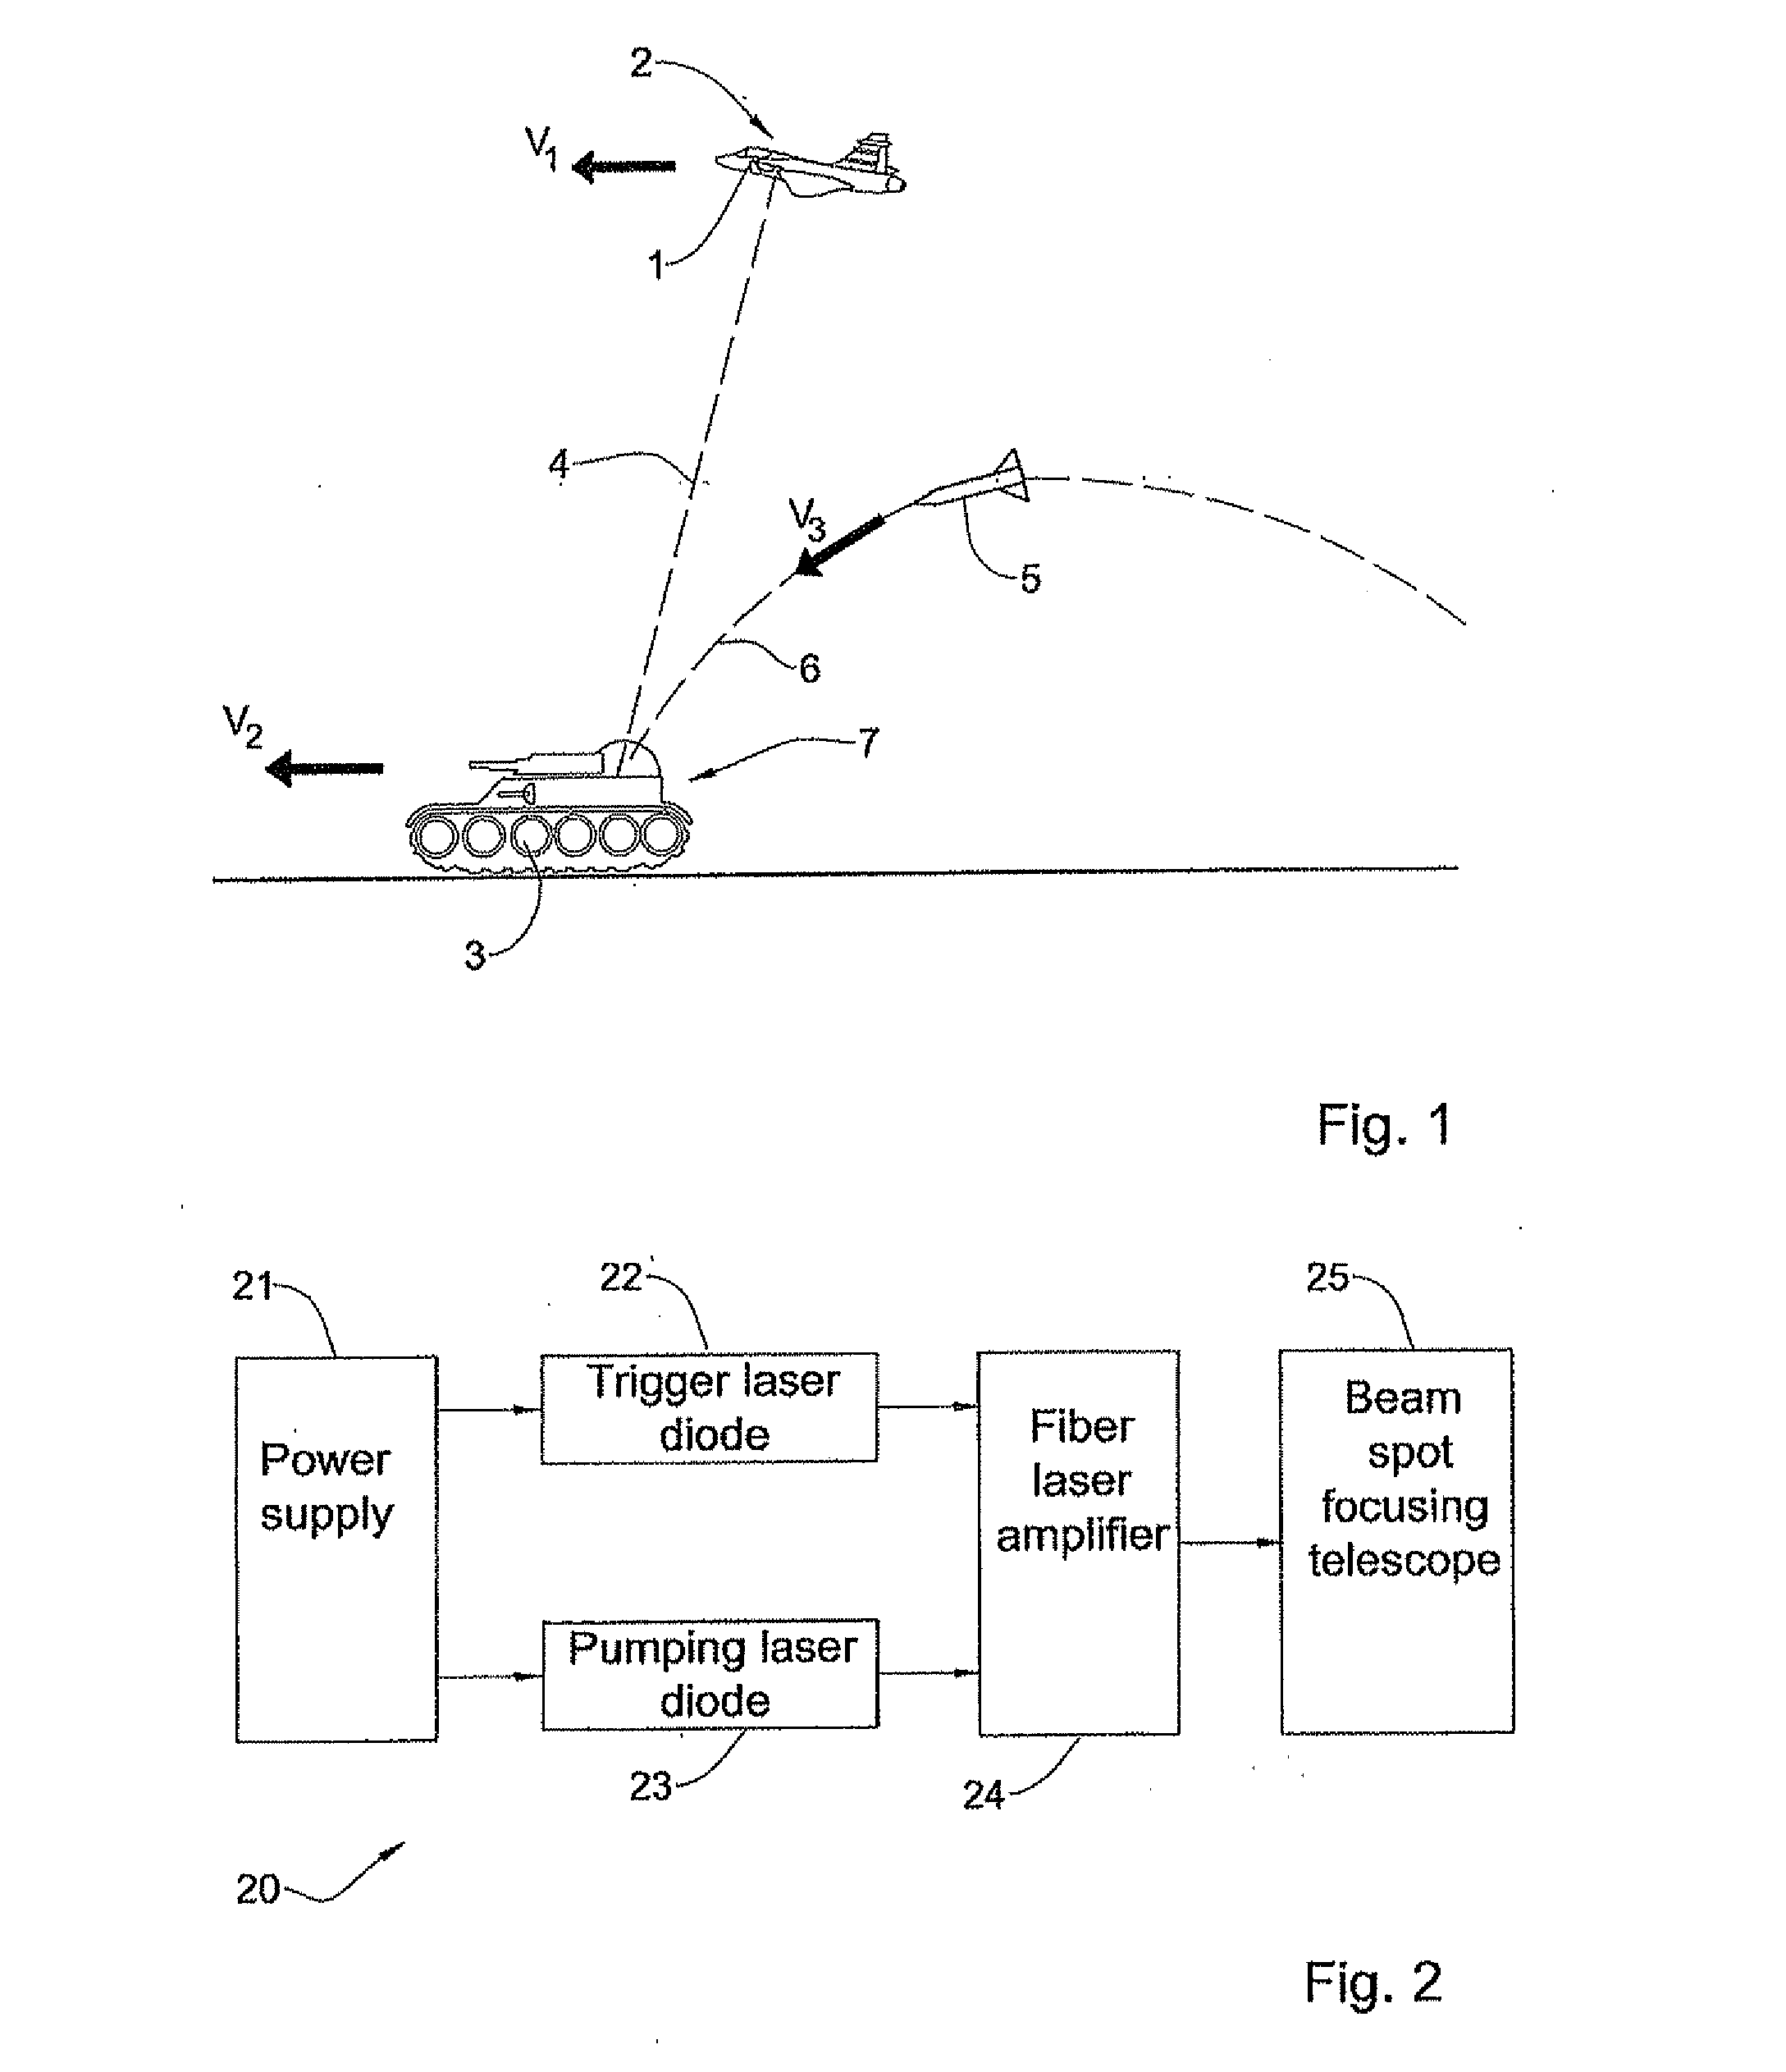 Method and system for designating a target and generating target-related action